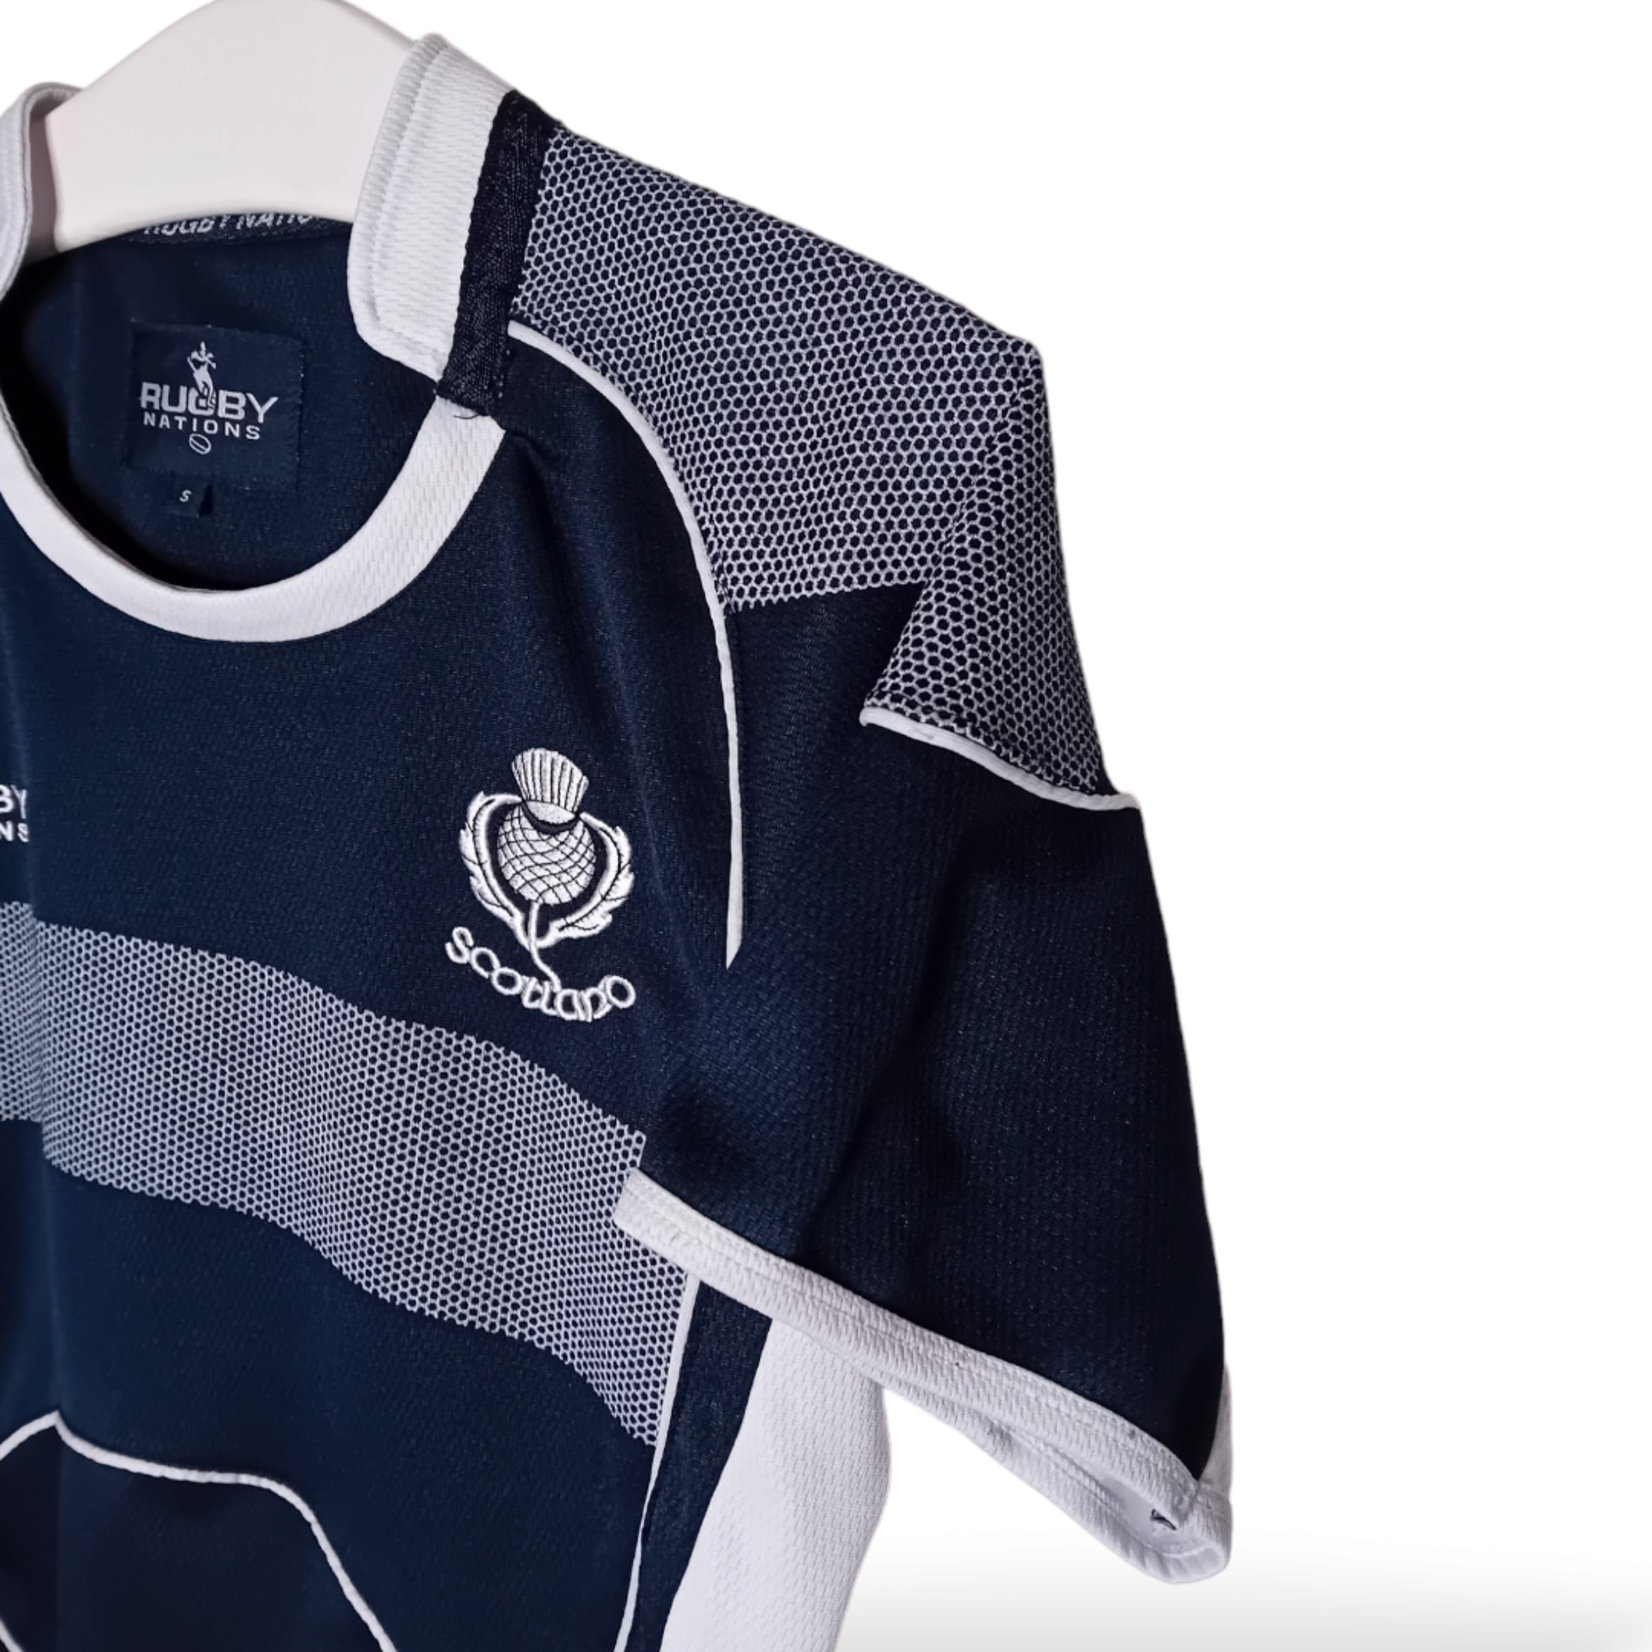 Rugby Nations Original Rugby Nations vintage rugby jersey Scotland 2007